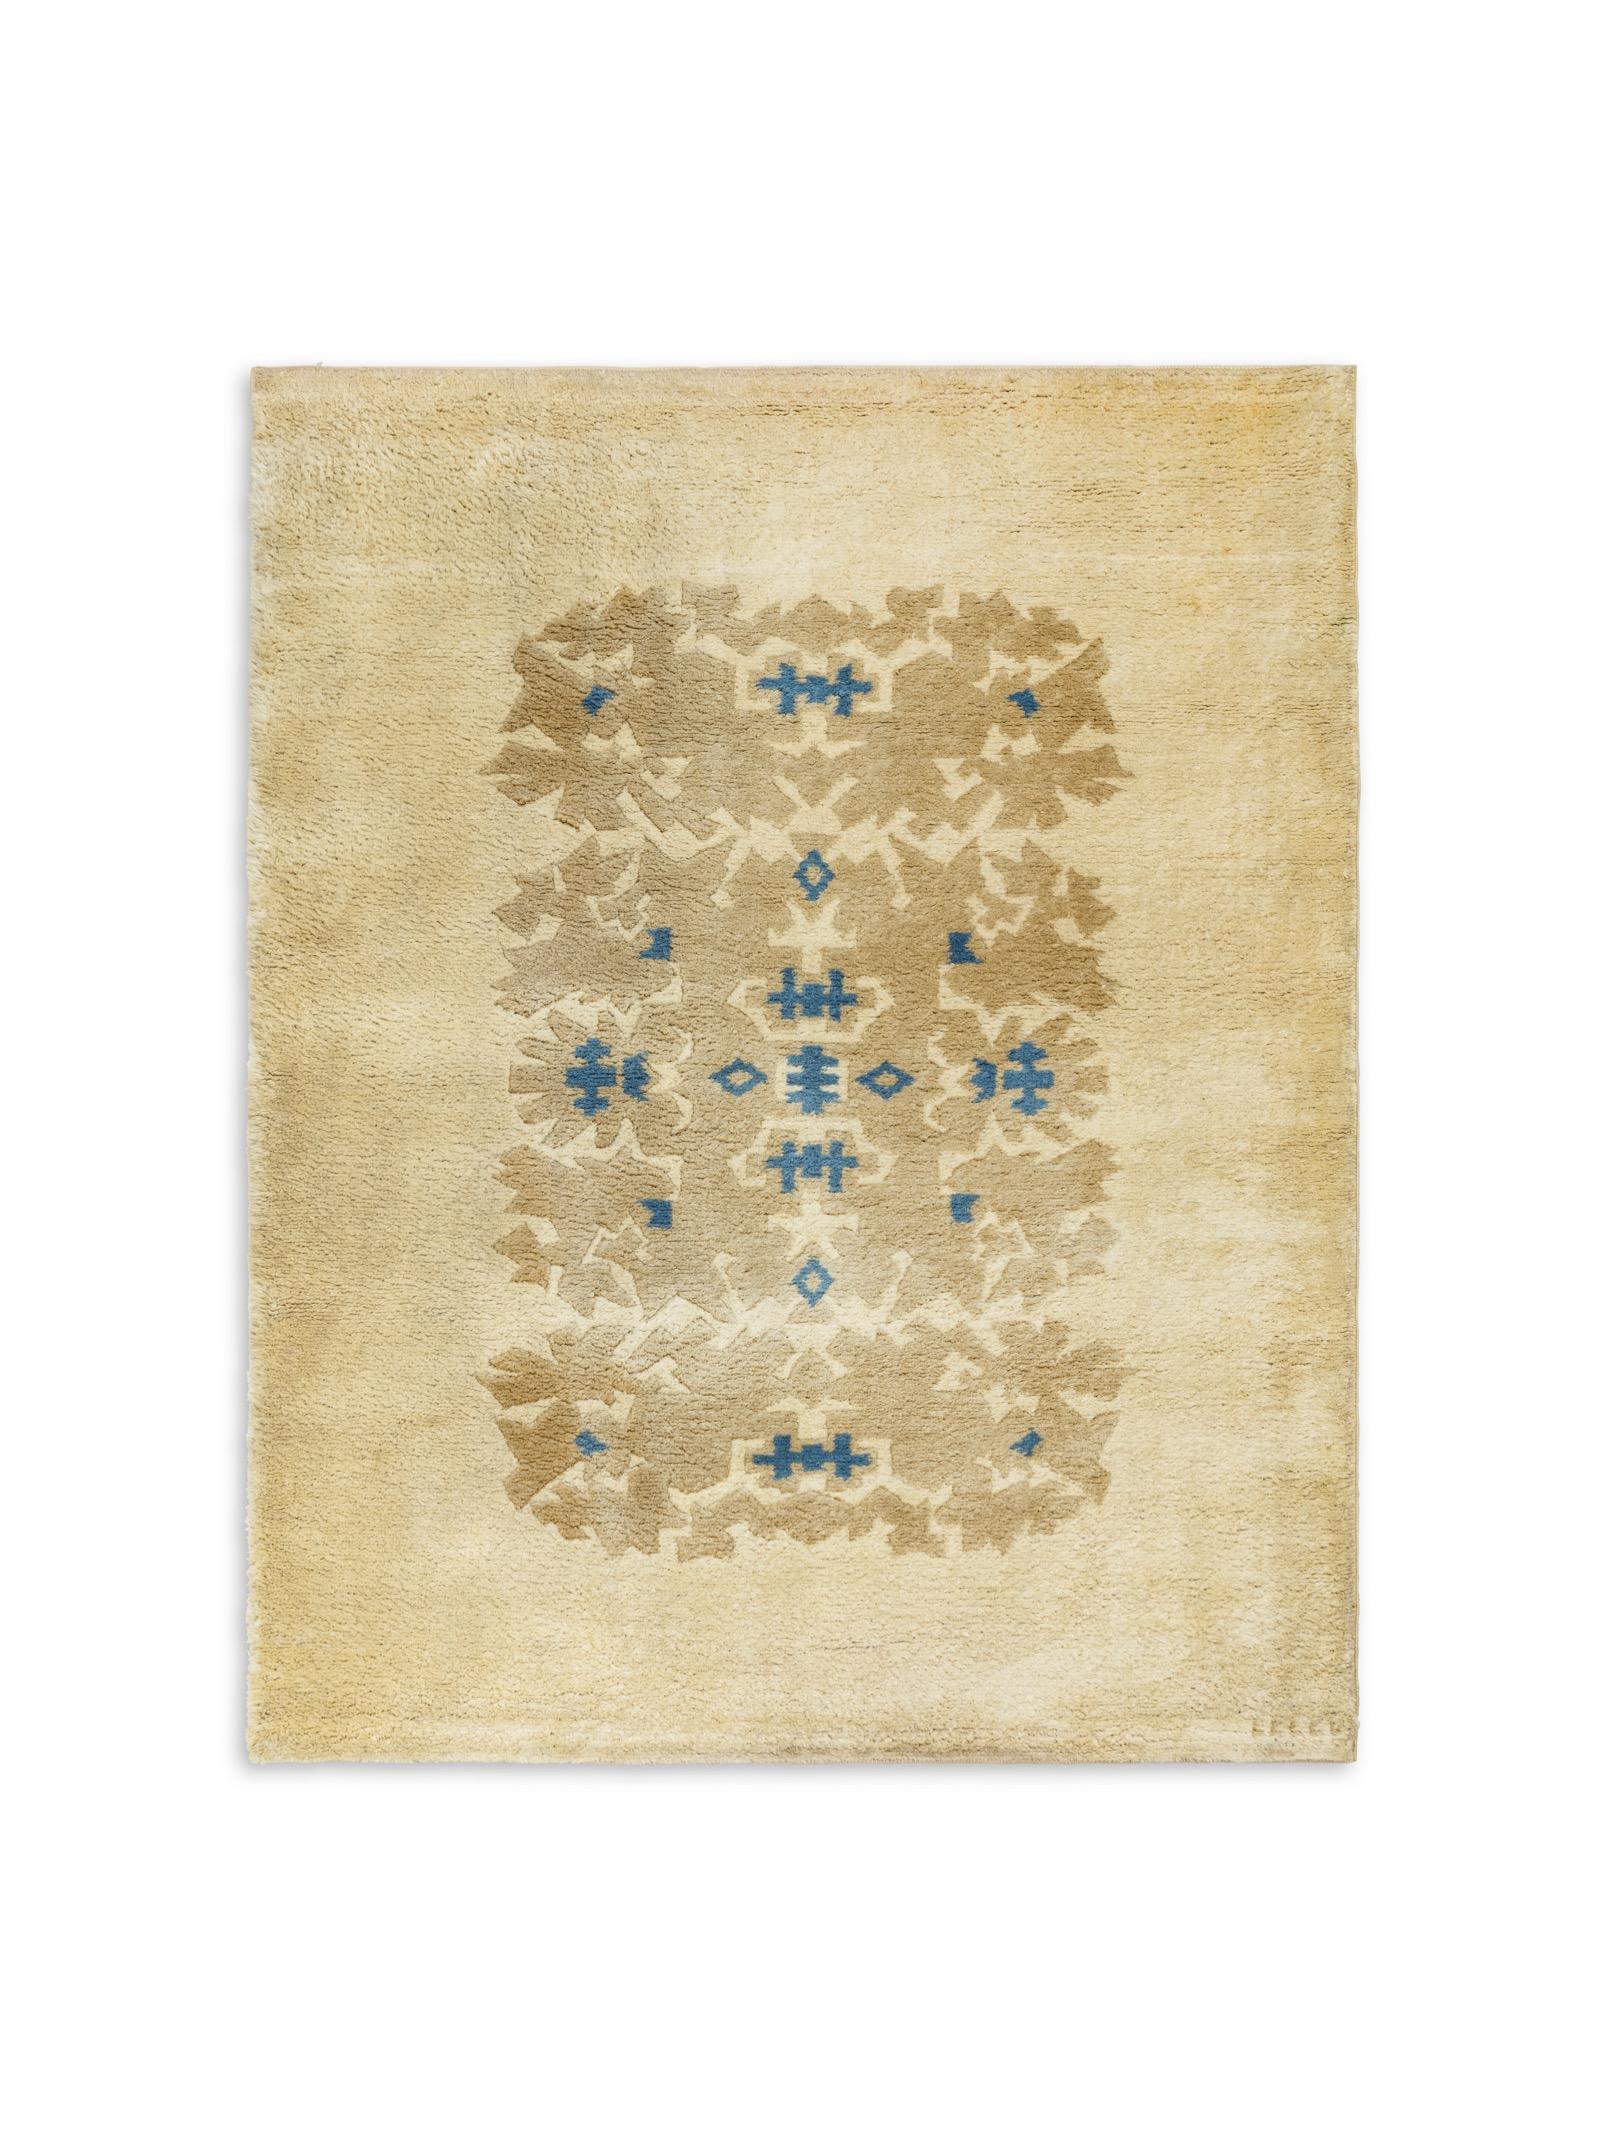 A rectangular knotted woolen rug with stylized blue and dark beige decoration on a beige background. Signed in the frame.